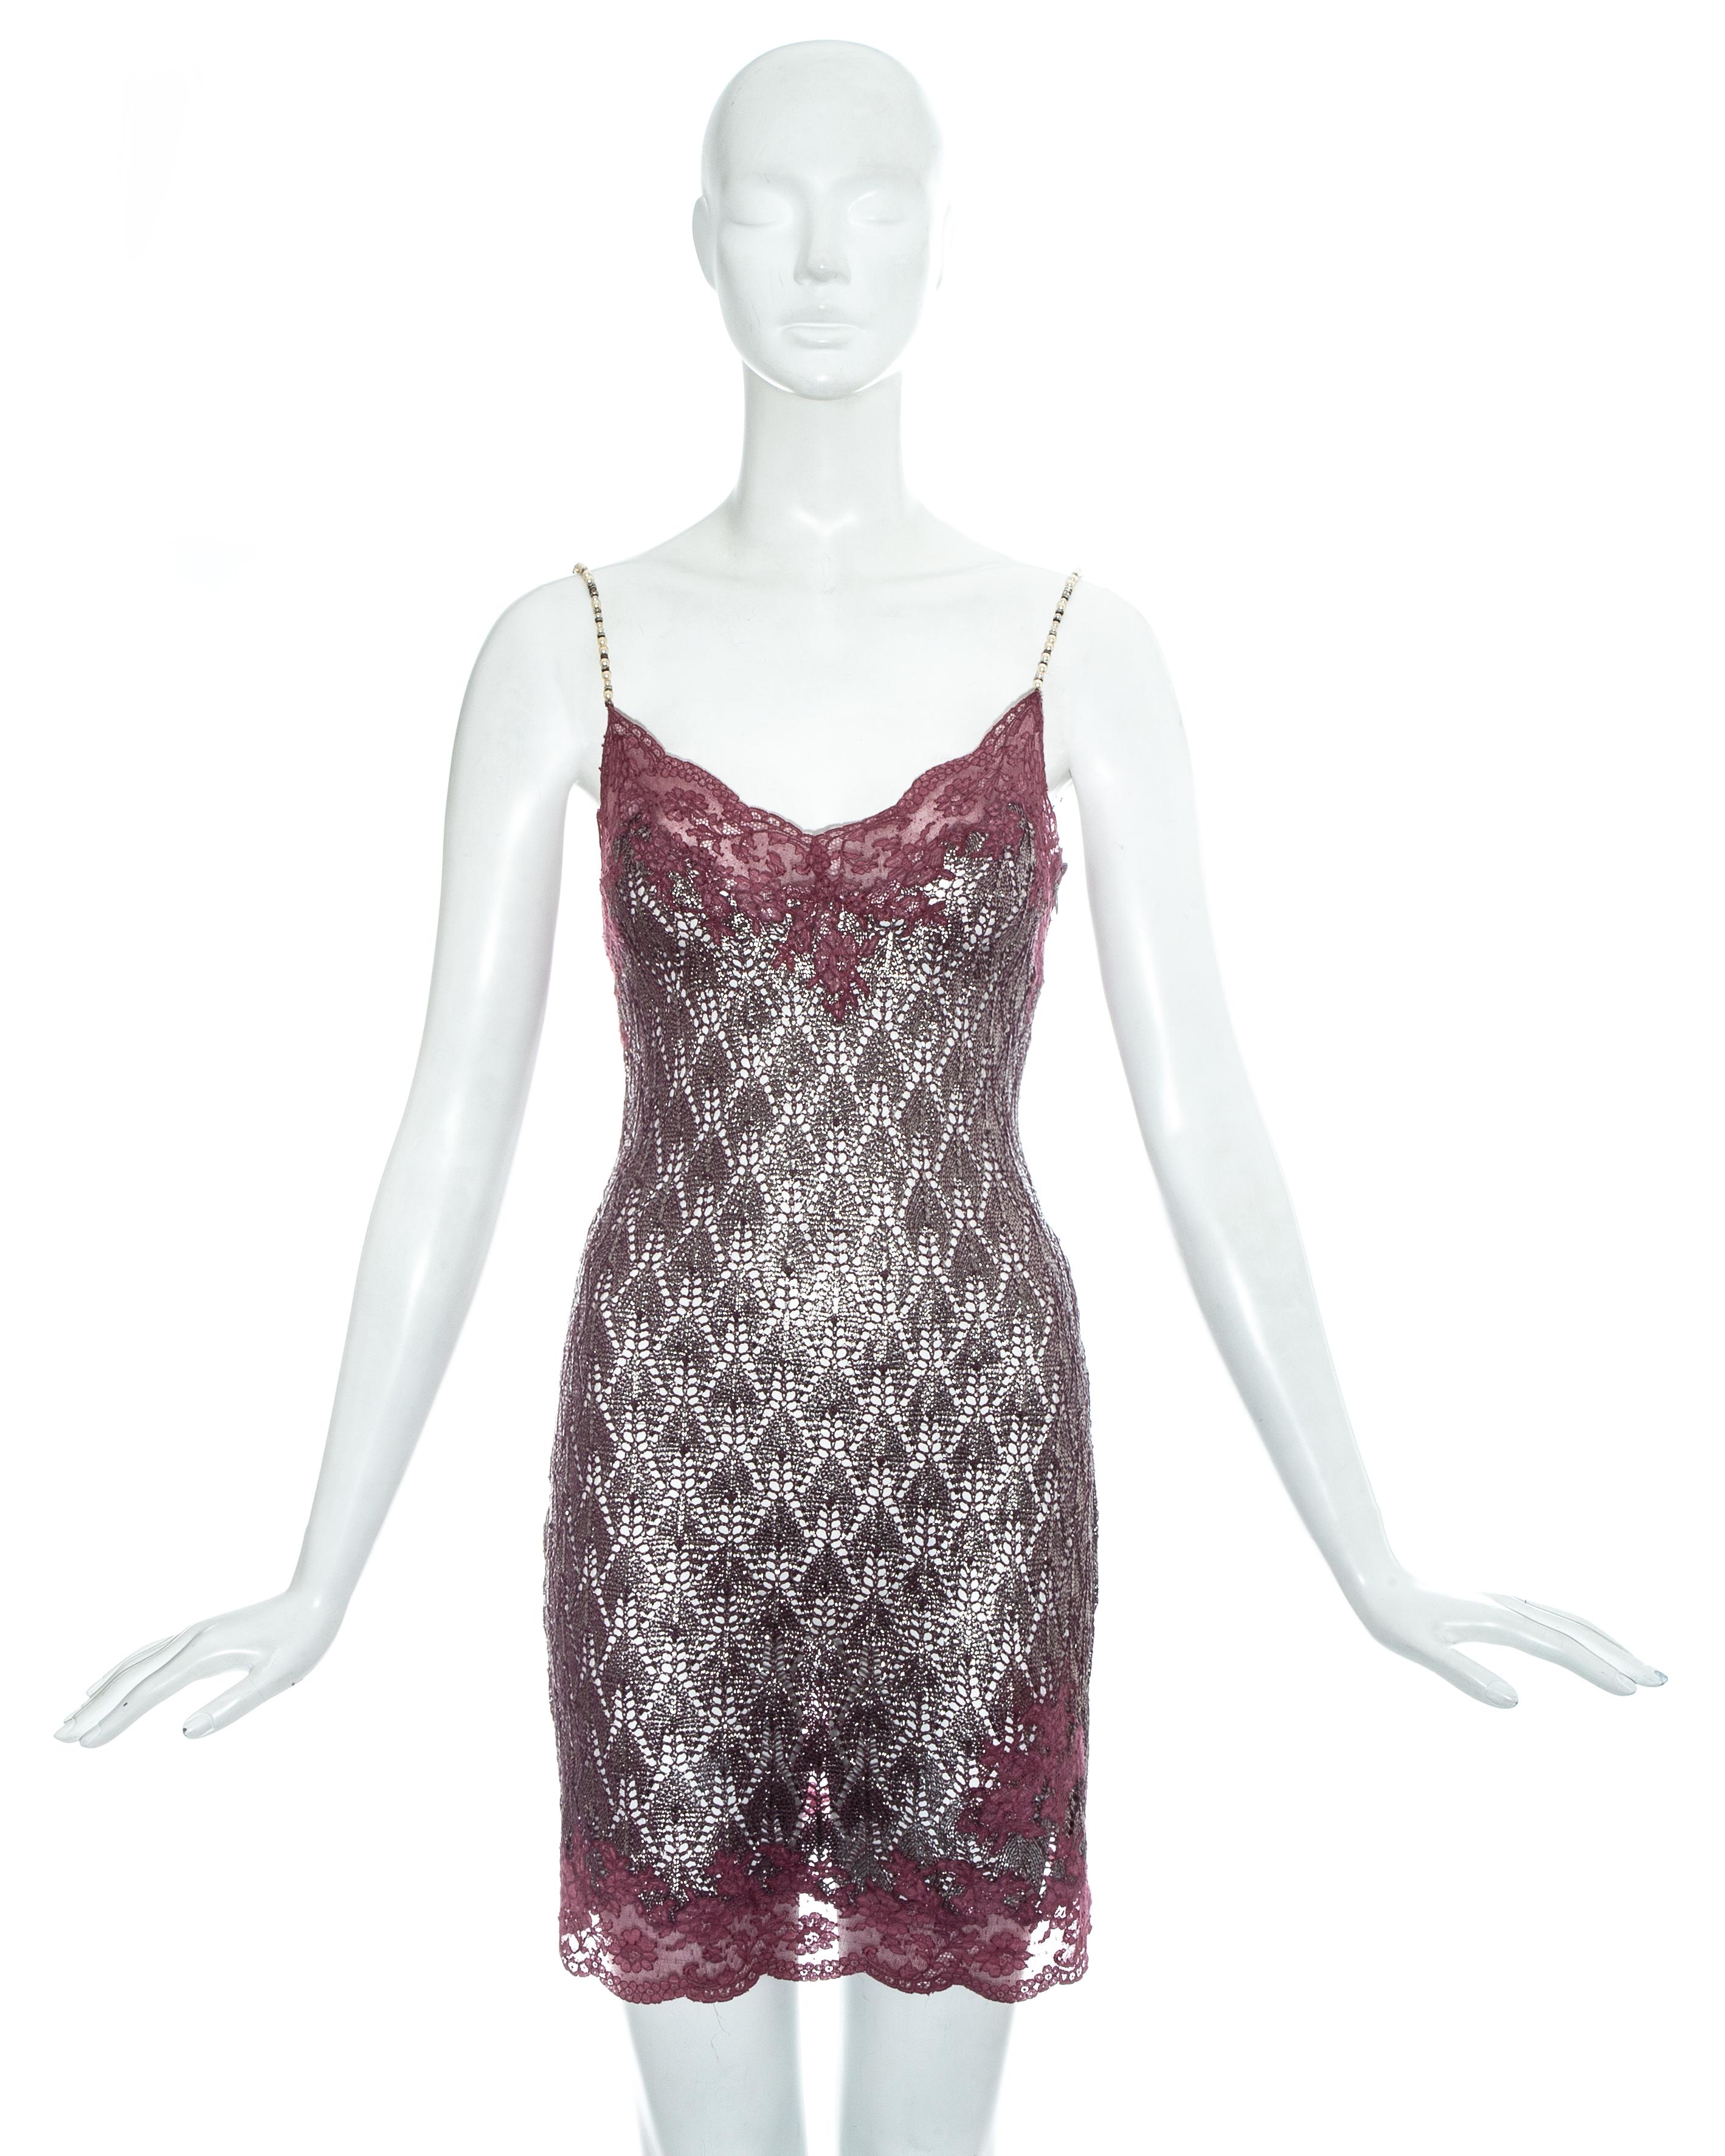 Christian Dior by John Galliano metallic silver and plum crochet knit evening mini dress with lace trim and beaded spaghetti straps  

Spring-Summer 1998